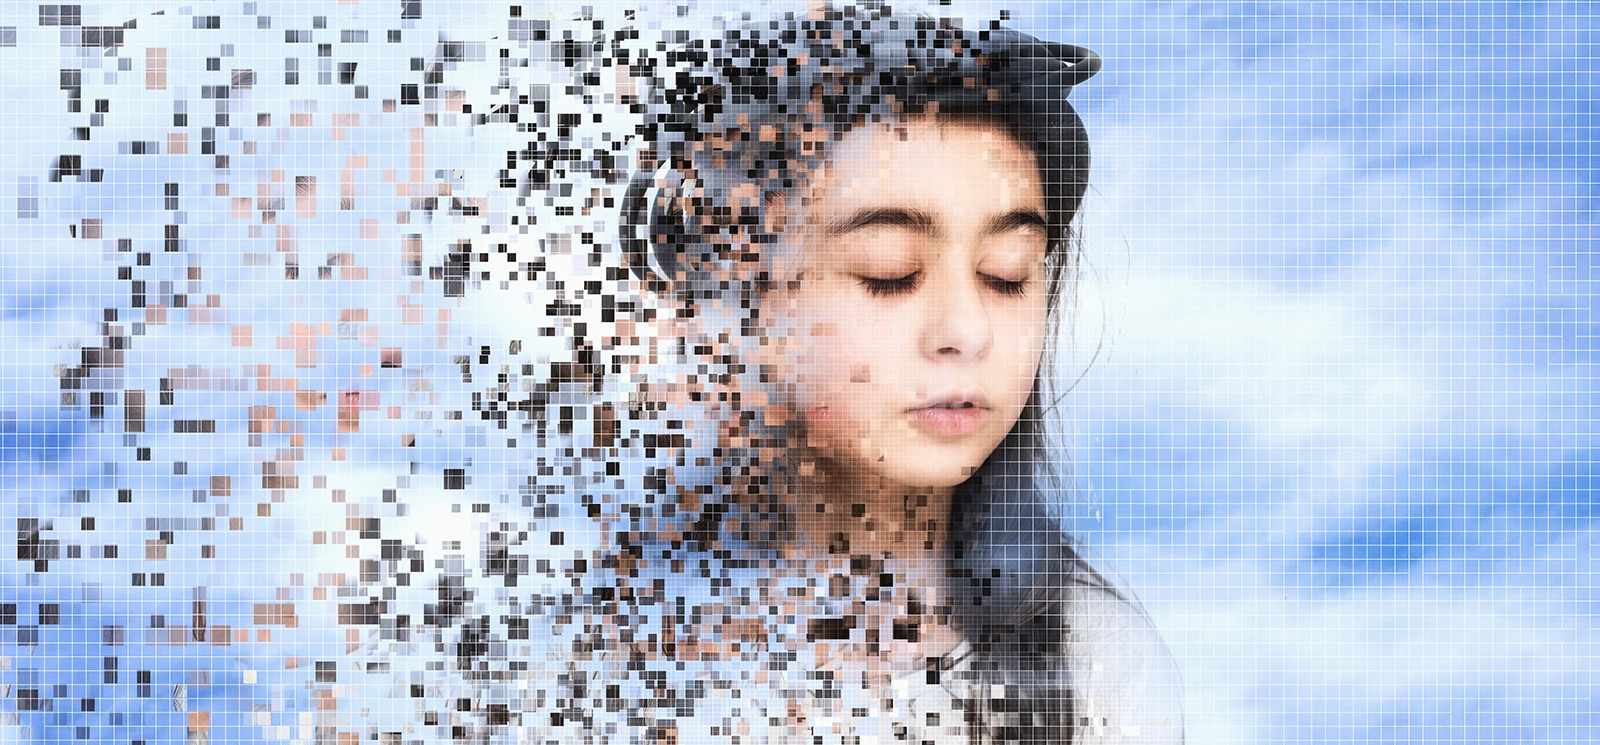 Pixelated Girl in Clouds